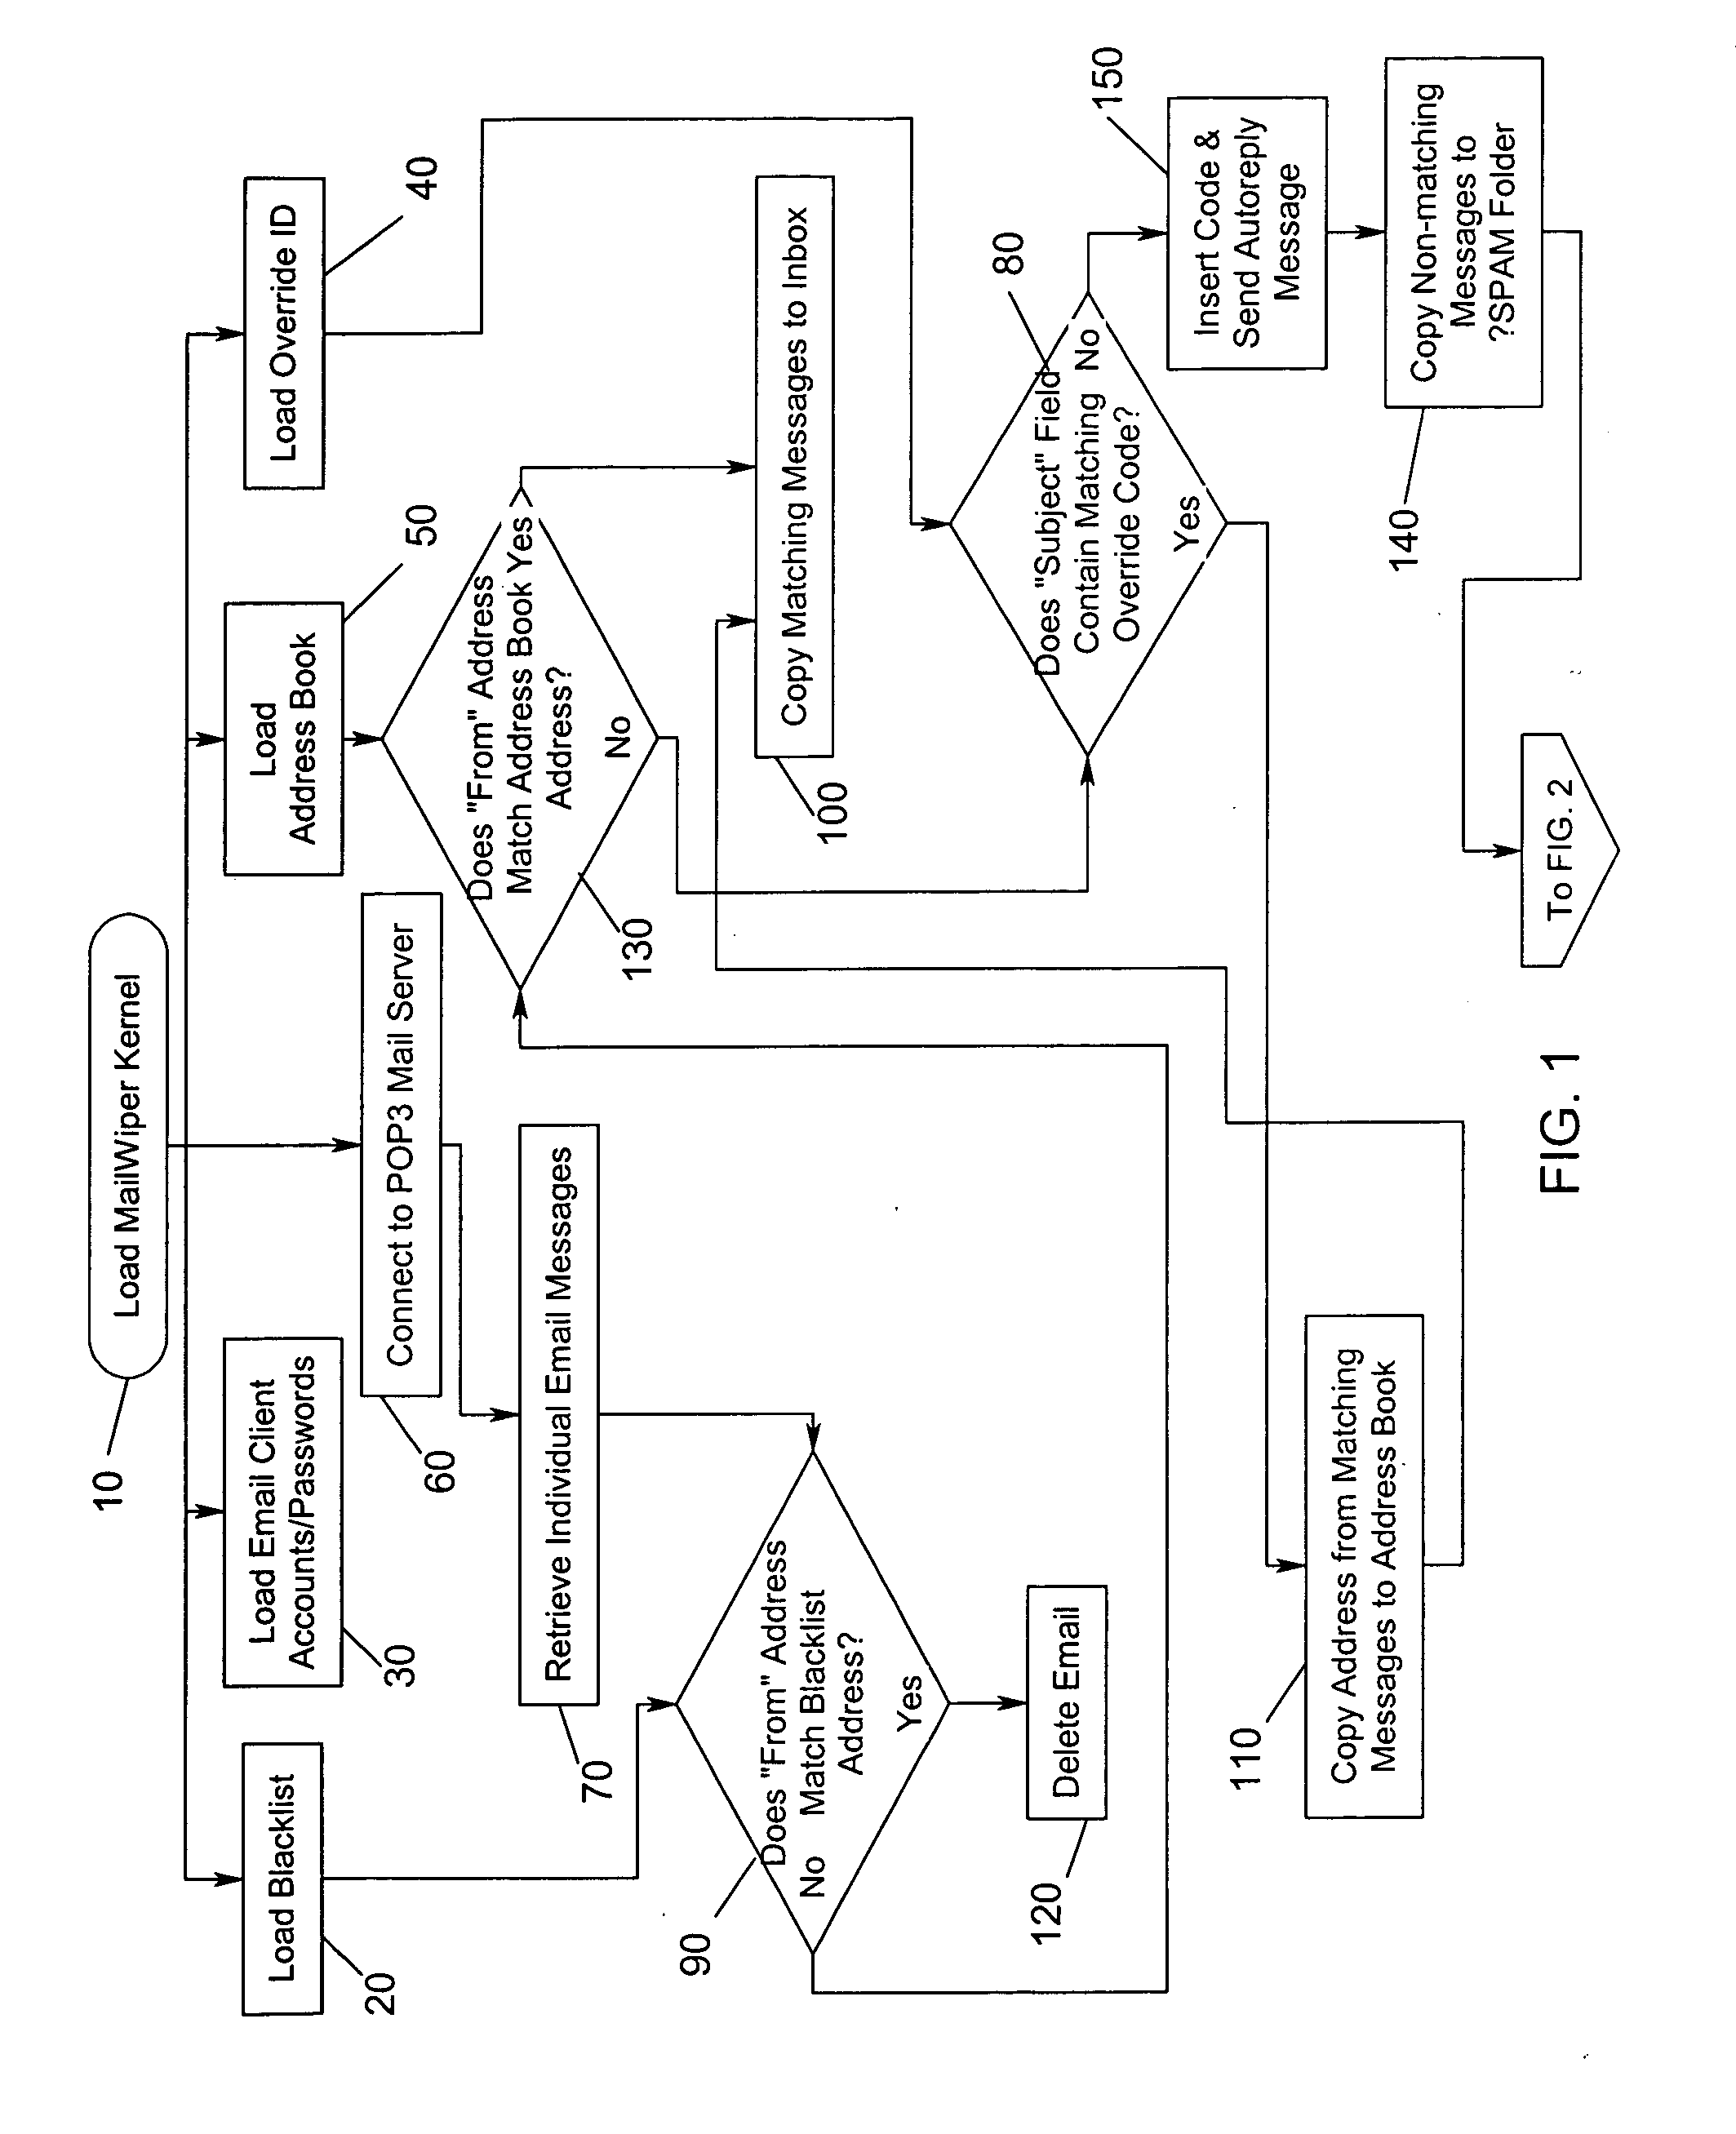 System and method for eliminating unsolicited junk or spam electronic mail